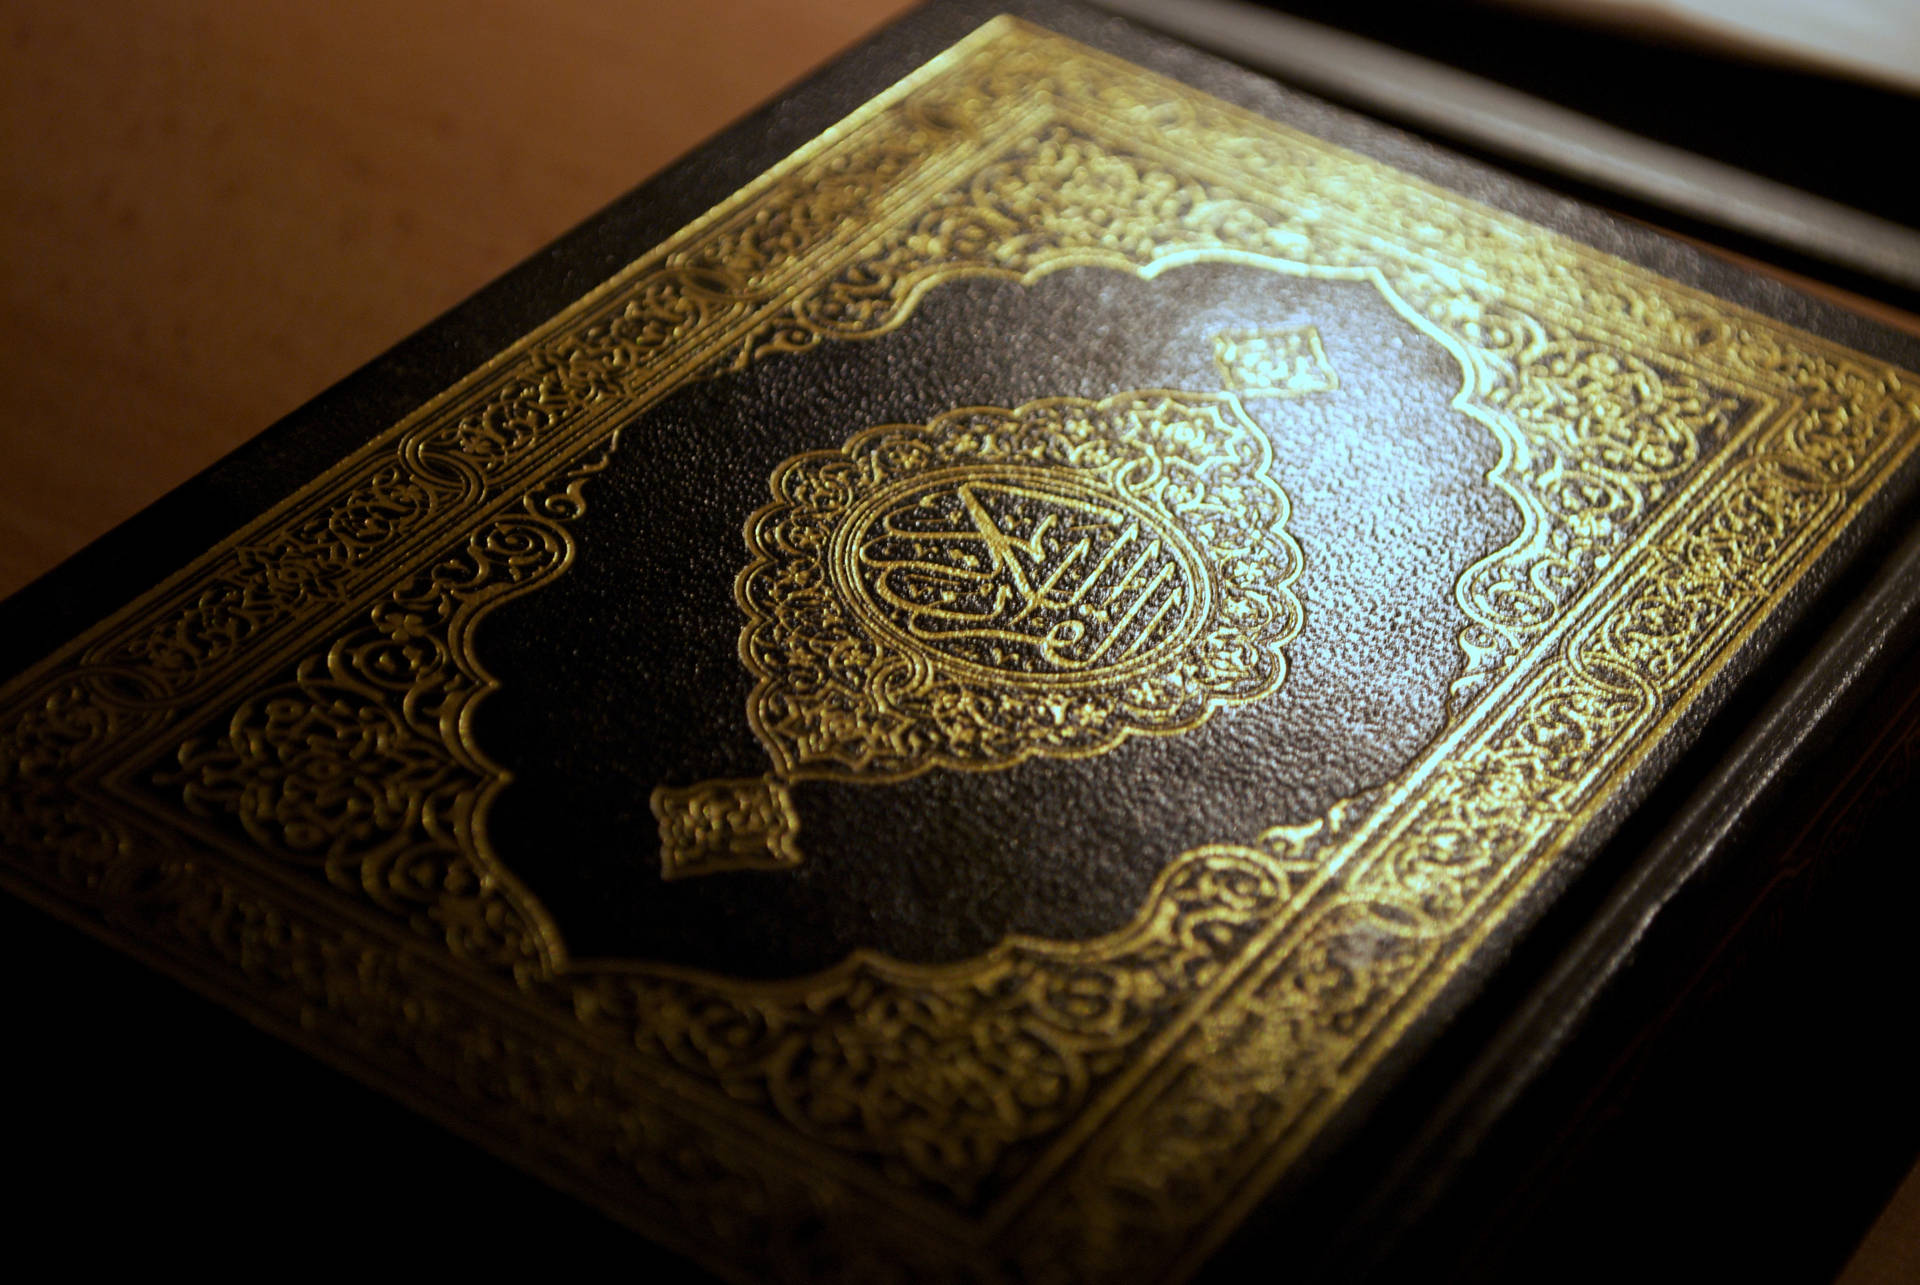 An exquisite gold Islamic book cover, beautifully decorated with intricate artwork. Wallpaper